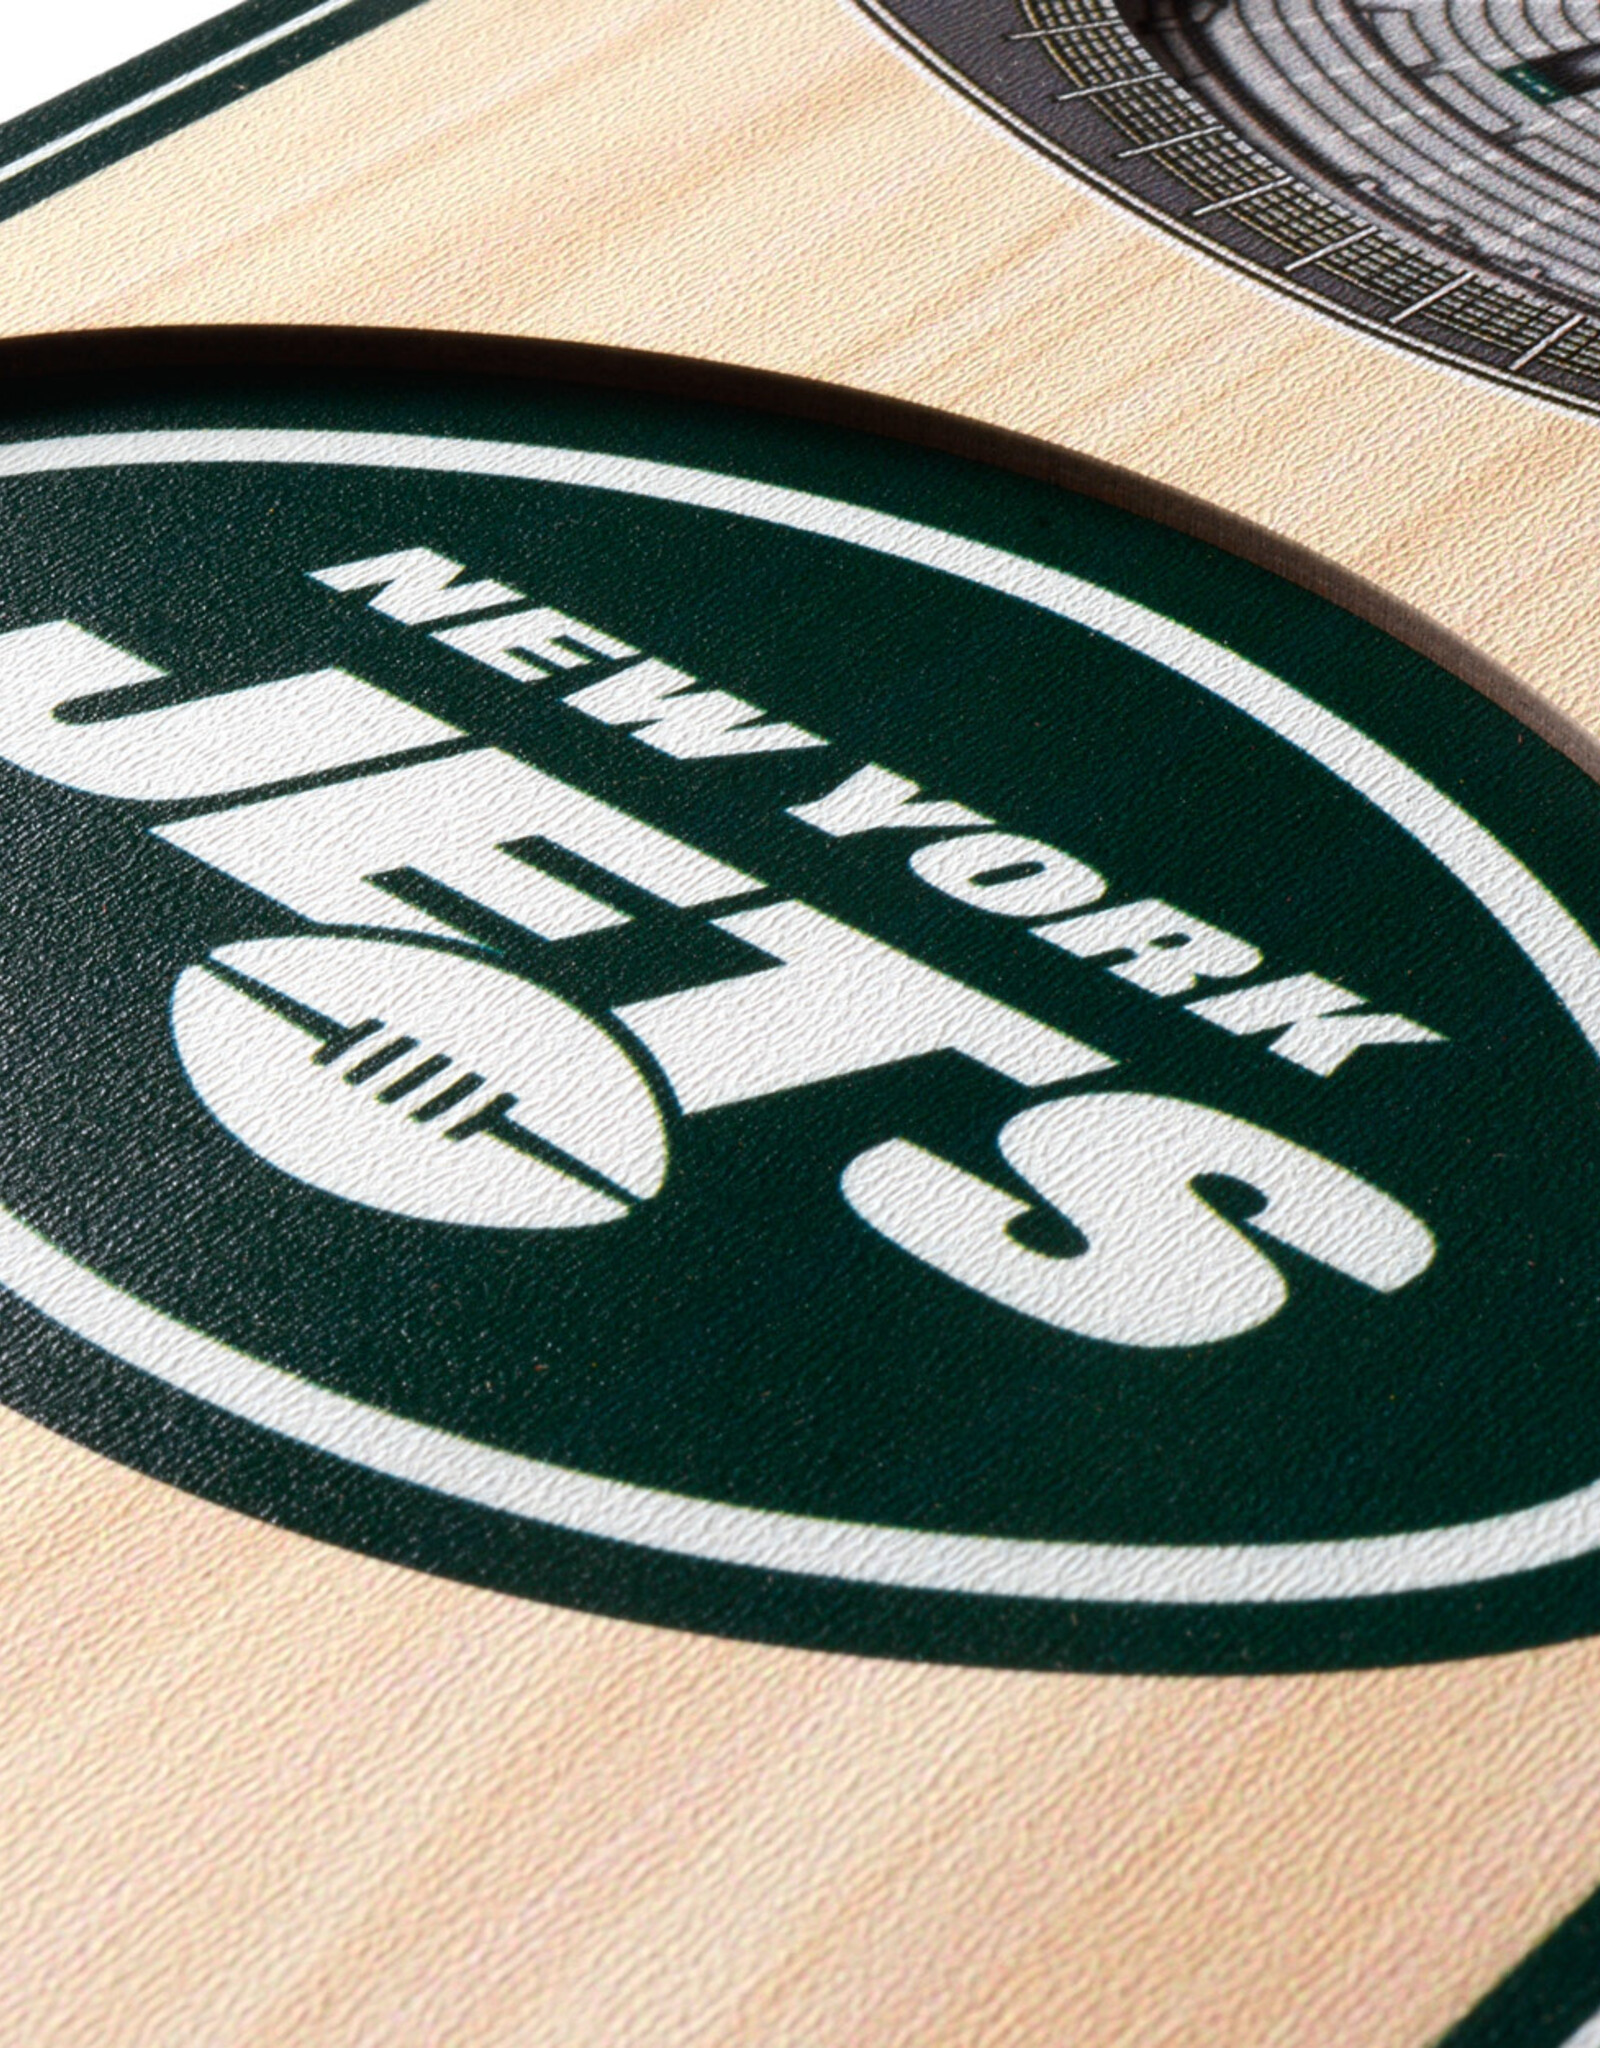 YOU THE FAN New York Jets 3D StadiumView 6x19 Banner